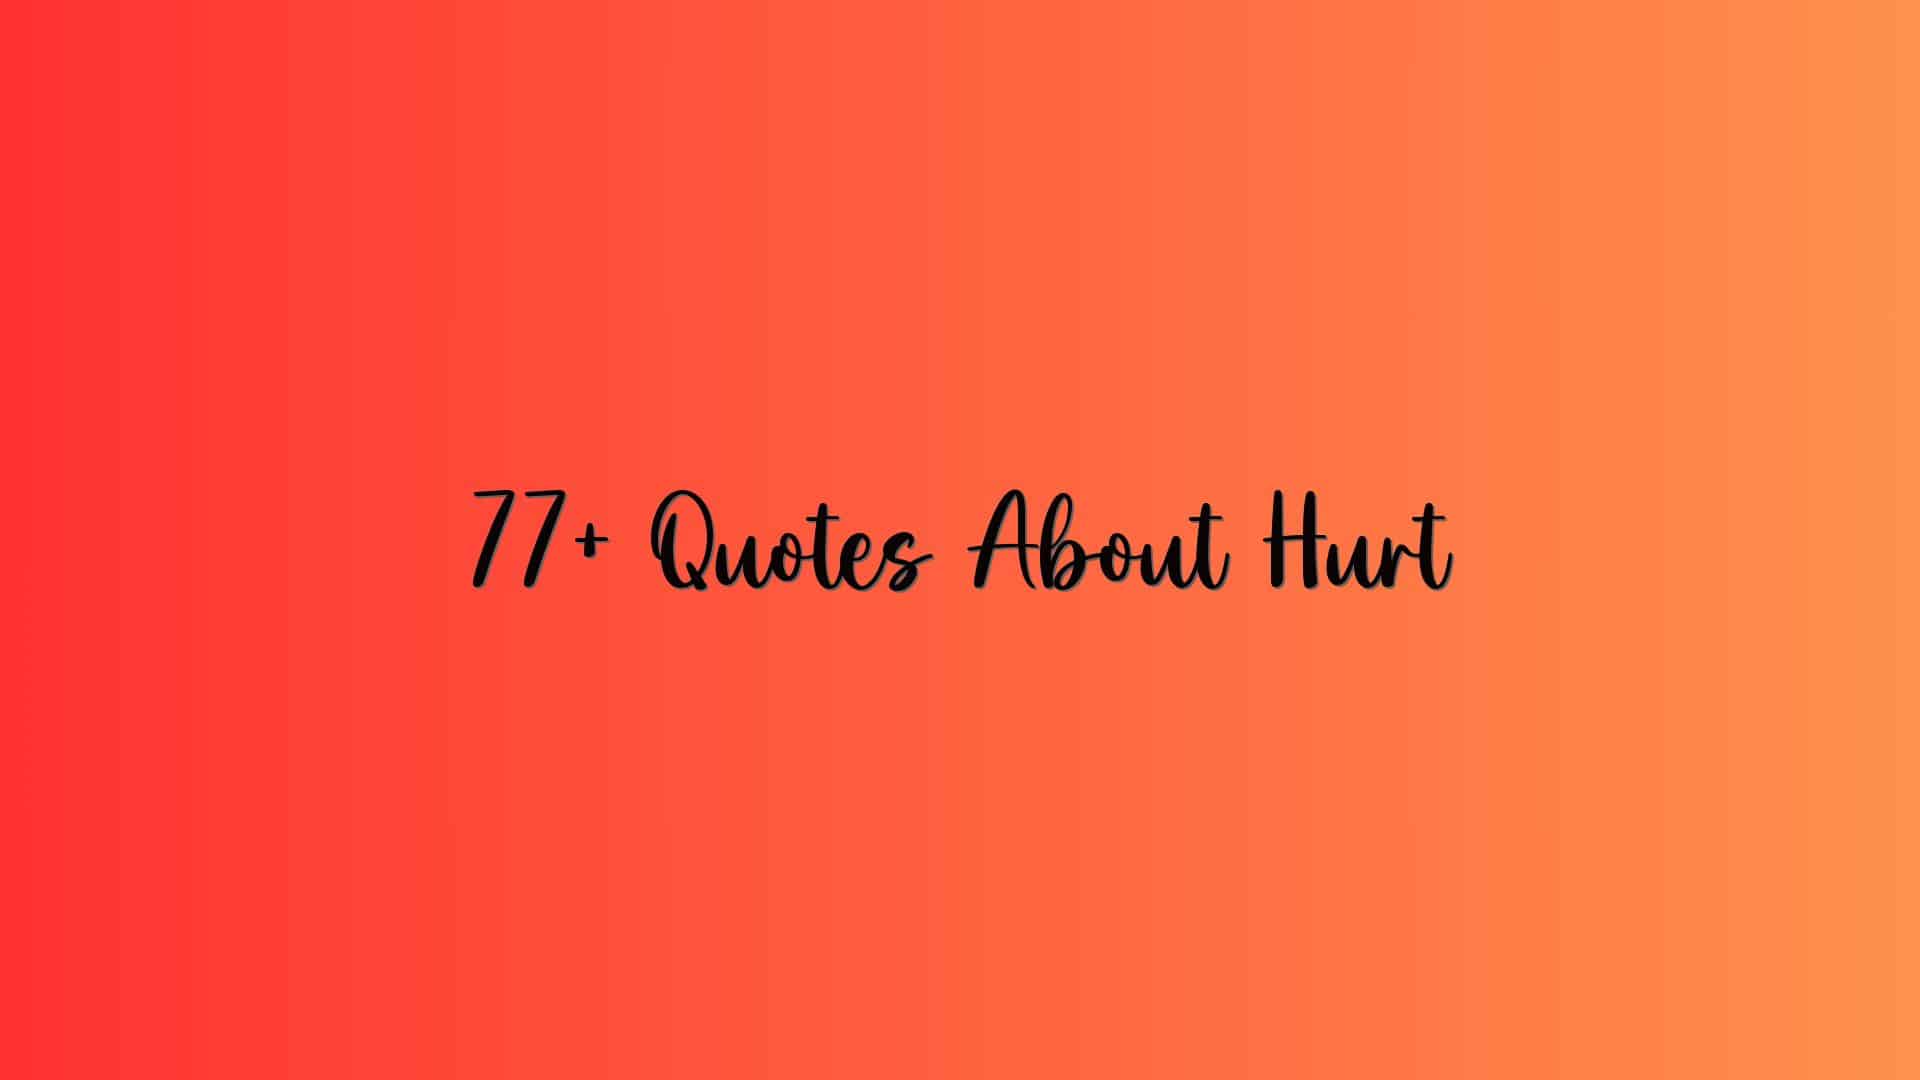 77+ Quotes About Hurt